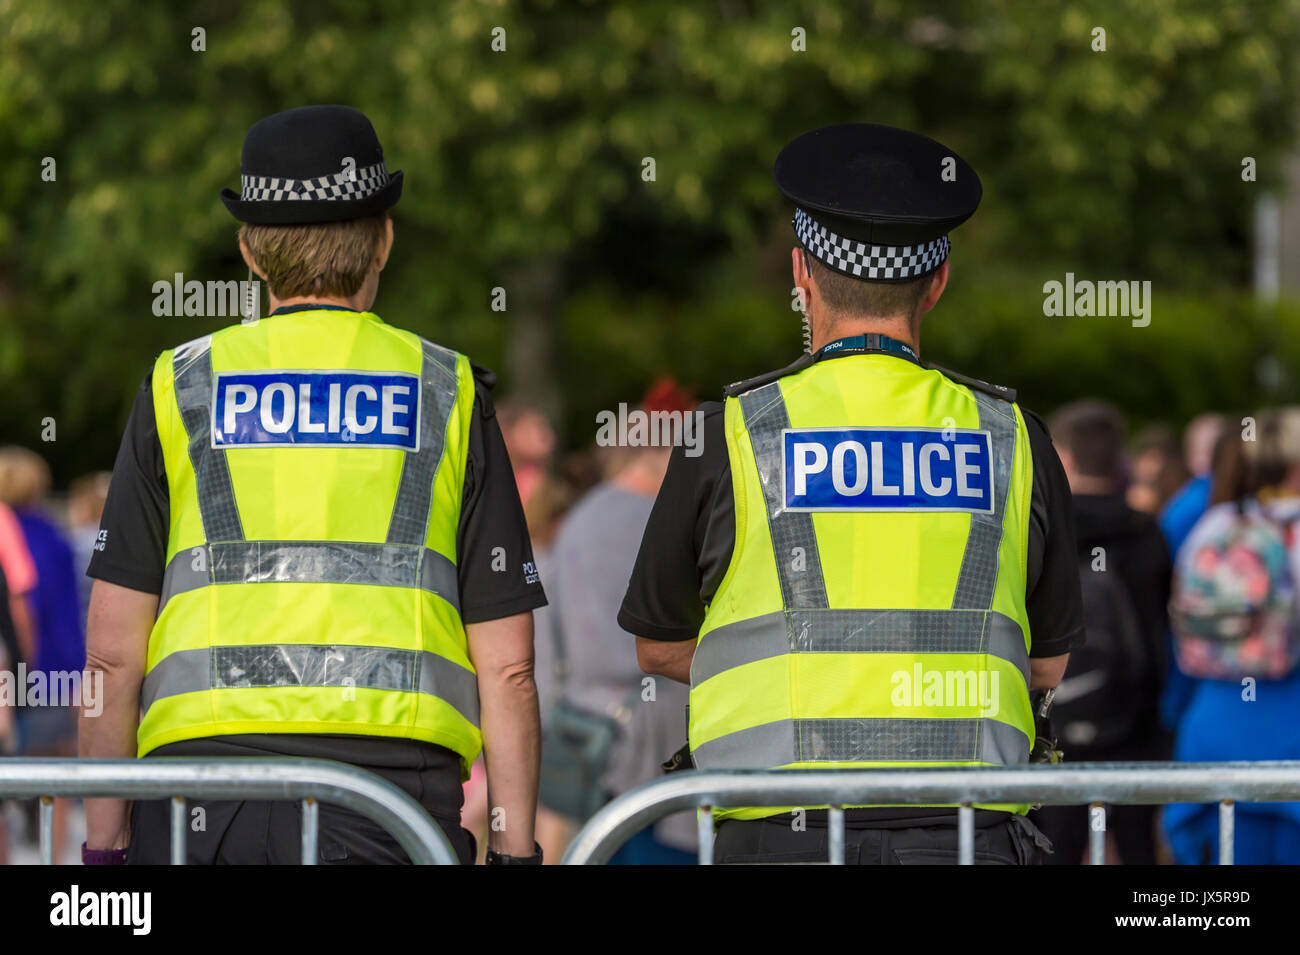 Dumfries, Scotland - August 12, 2017: Police Scotland officers on duty at a youth music festival. Stock Photo